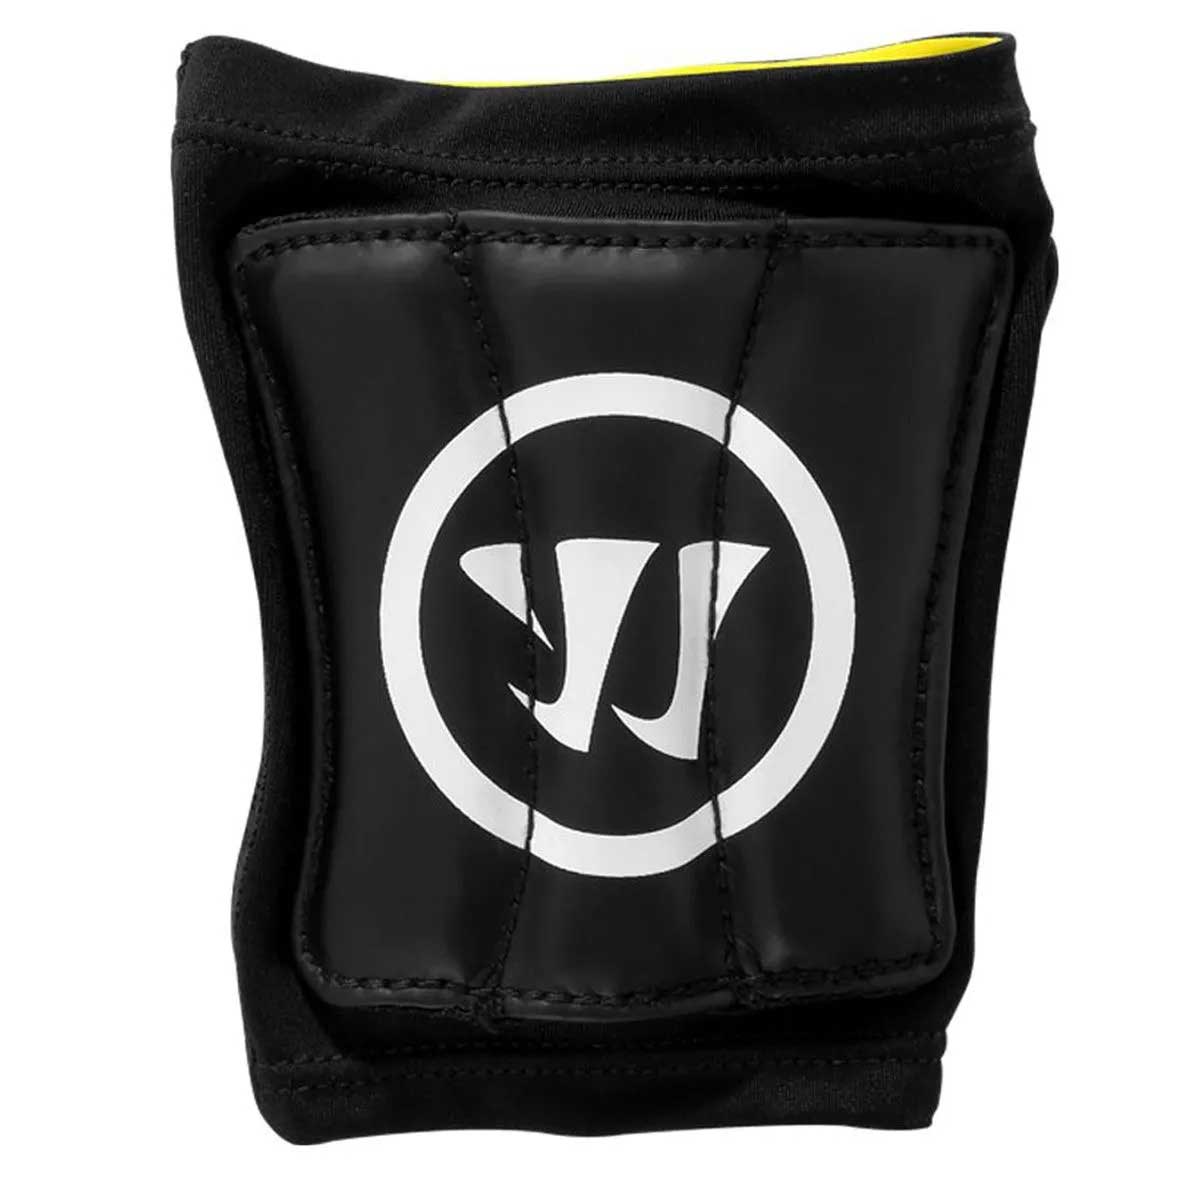 Warrior Lacrosse/Hockey Wrist Guards front view